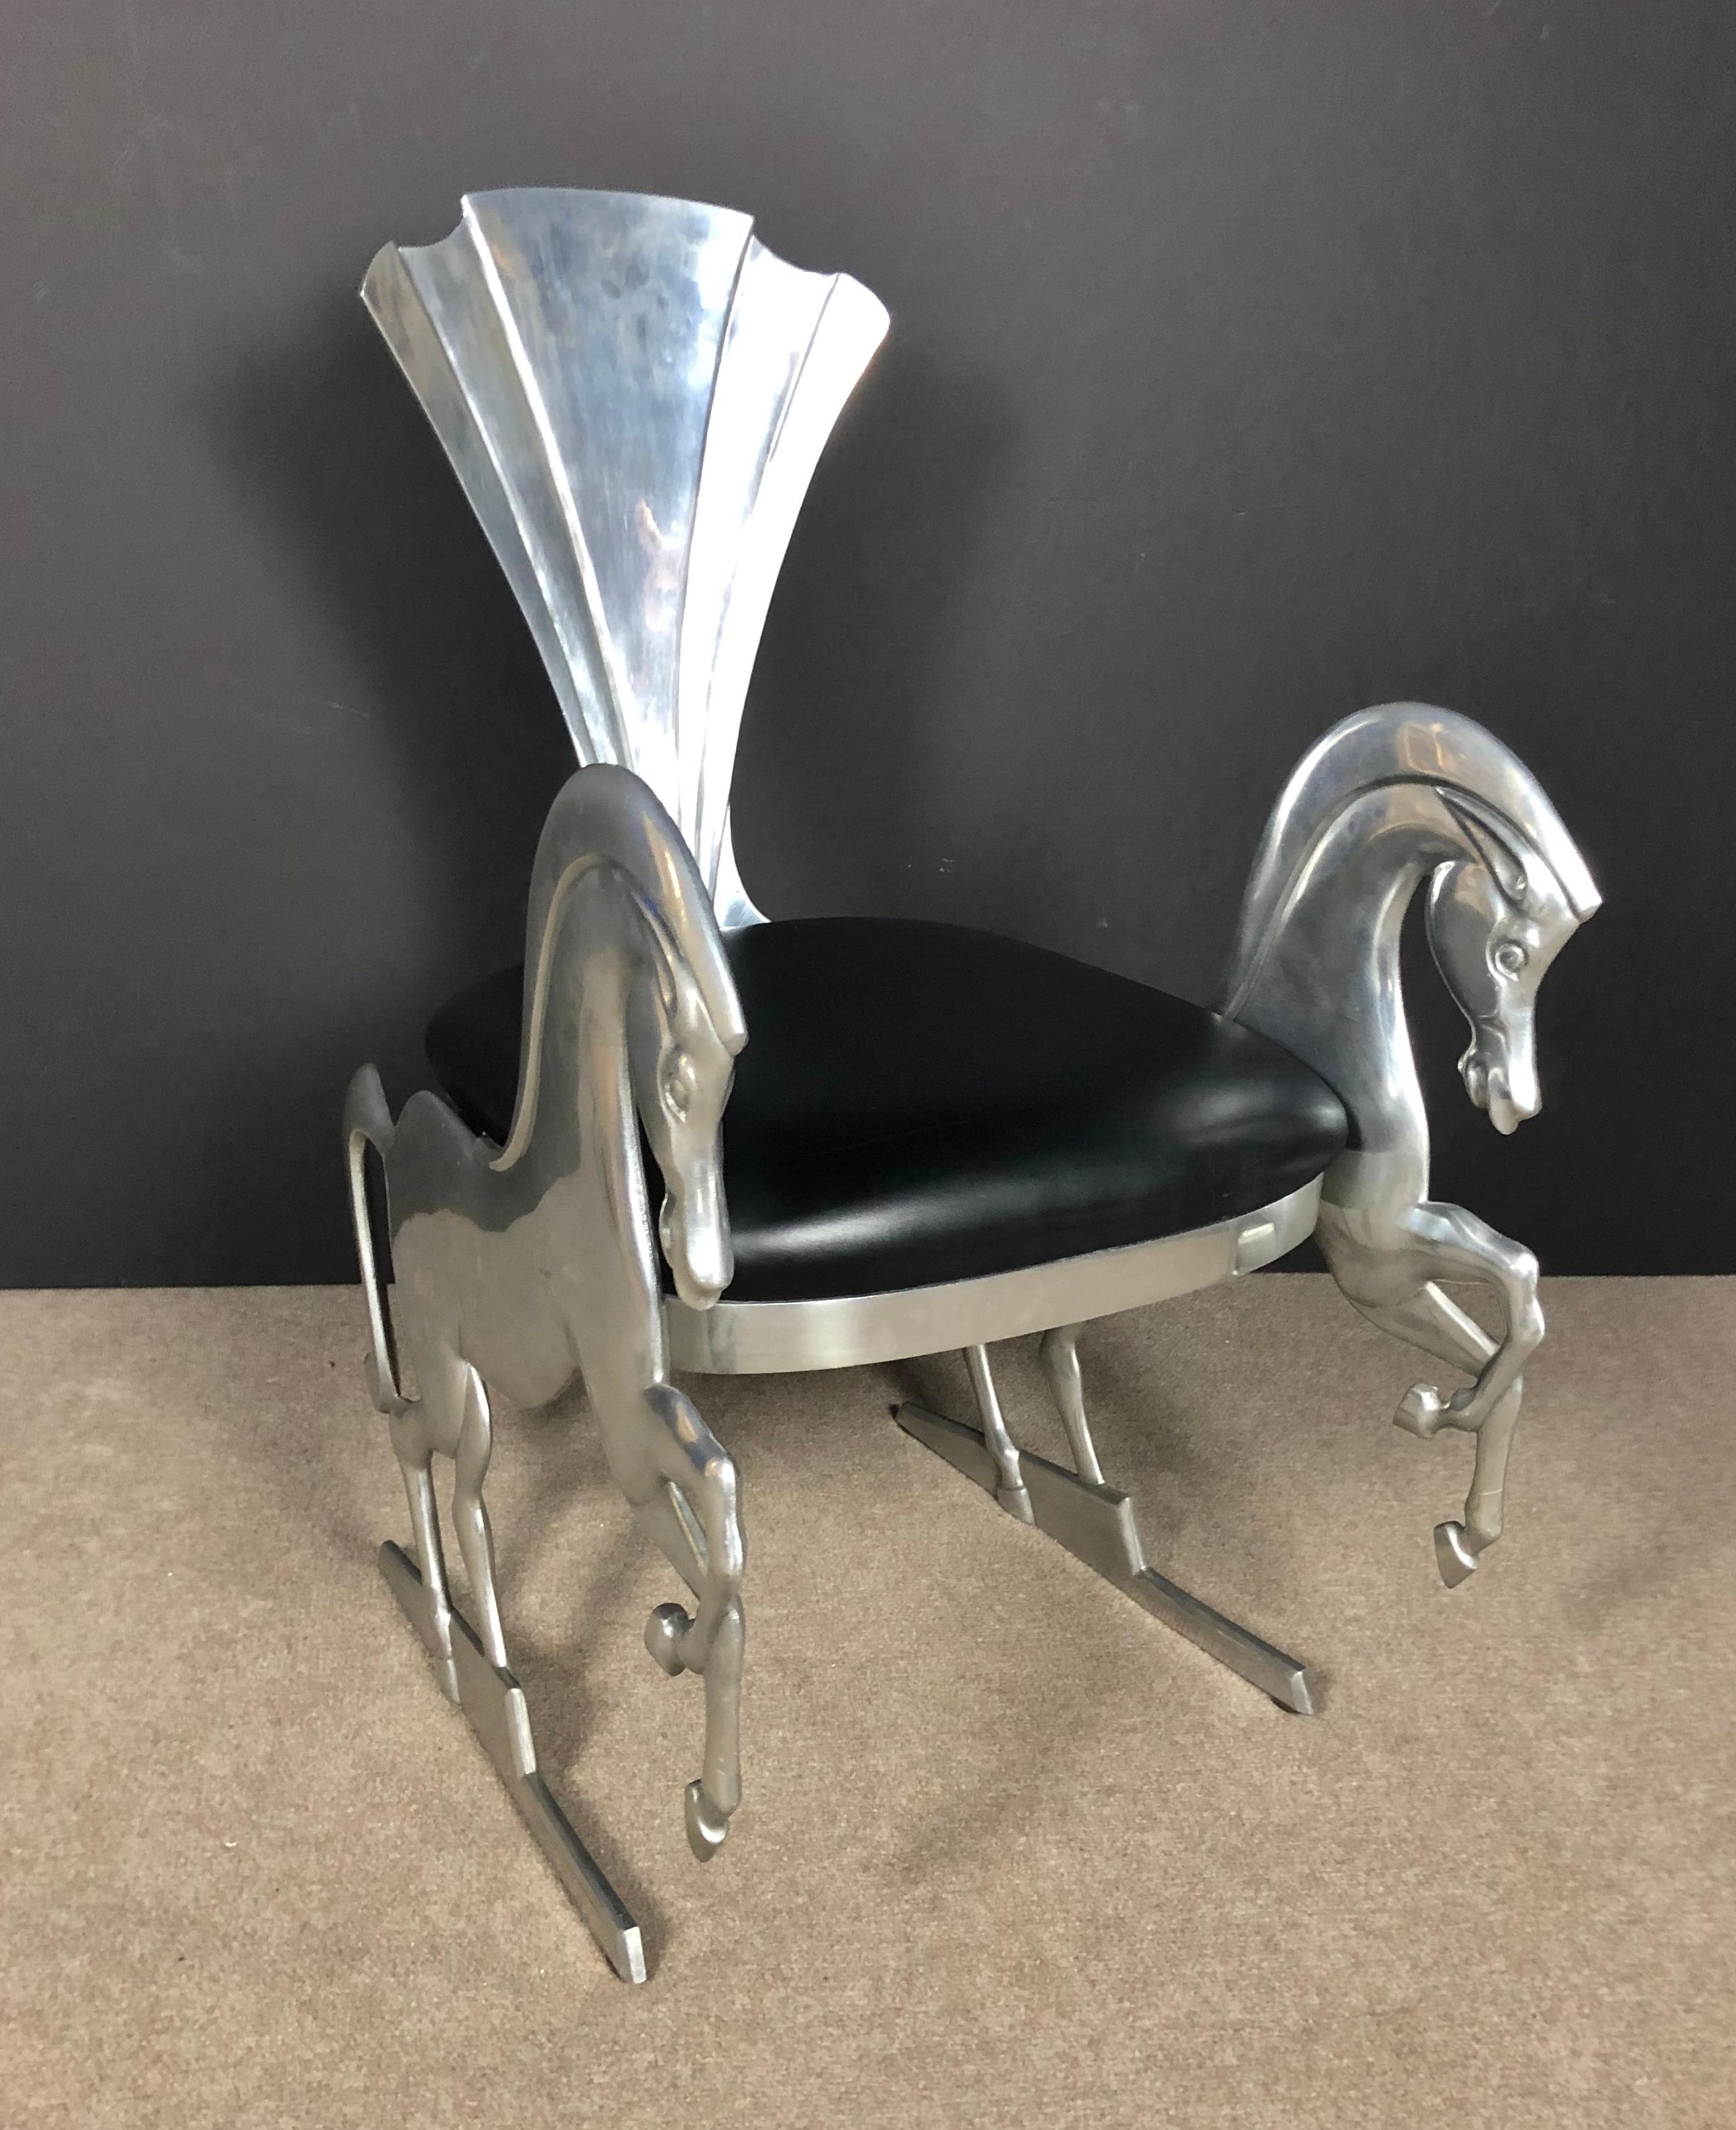 More art than chair. Art Modern or Postmodern with an Art Deco influence. Sculptural cast aluminum horse chair by Ray Lewis. Designer cast aluminum and leather chair.
Makers Mark: Fauna Collection by Ray Lewis HORSE chair number 4 of 950.

Fauna